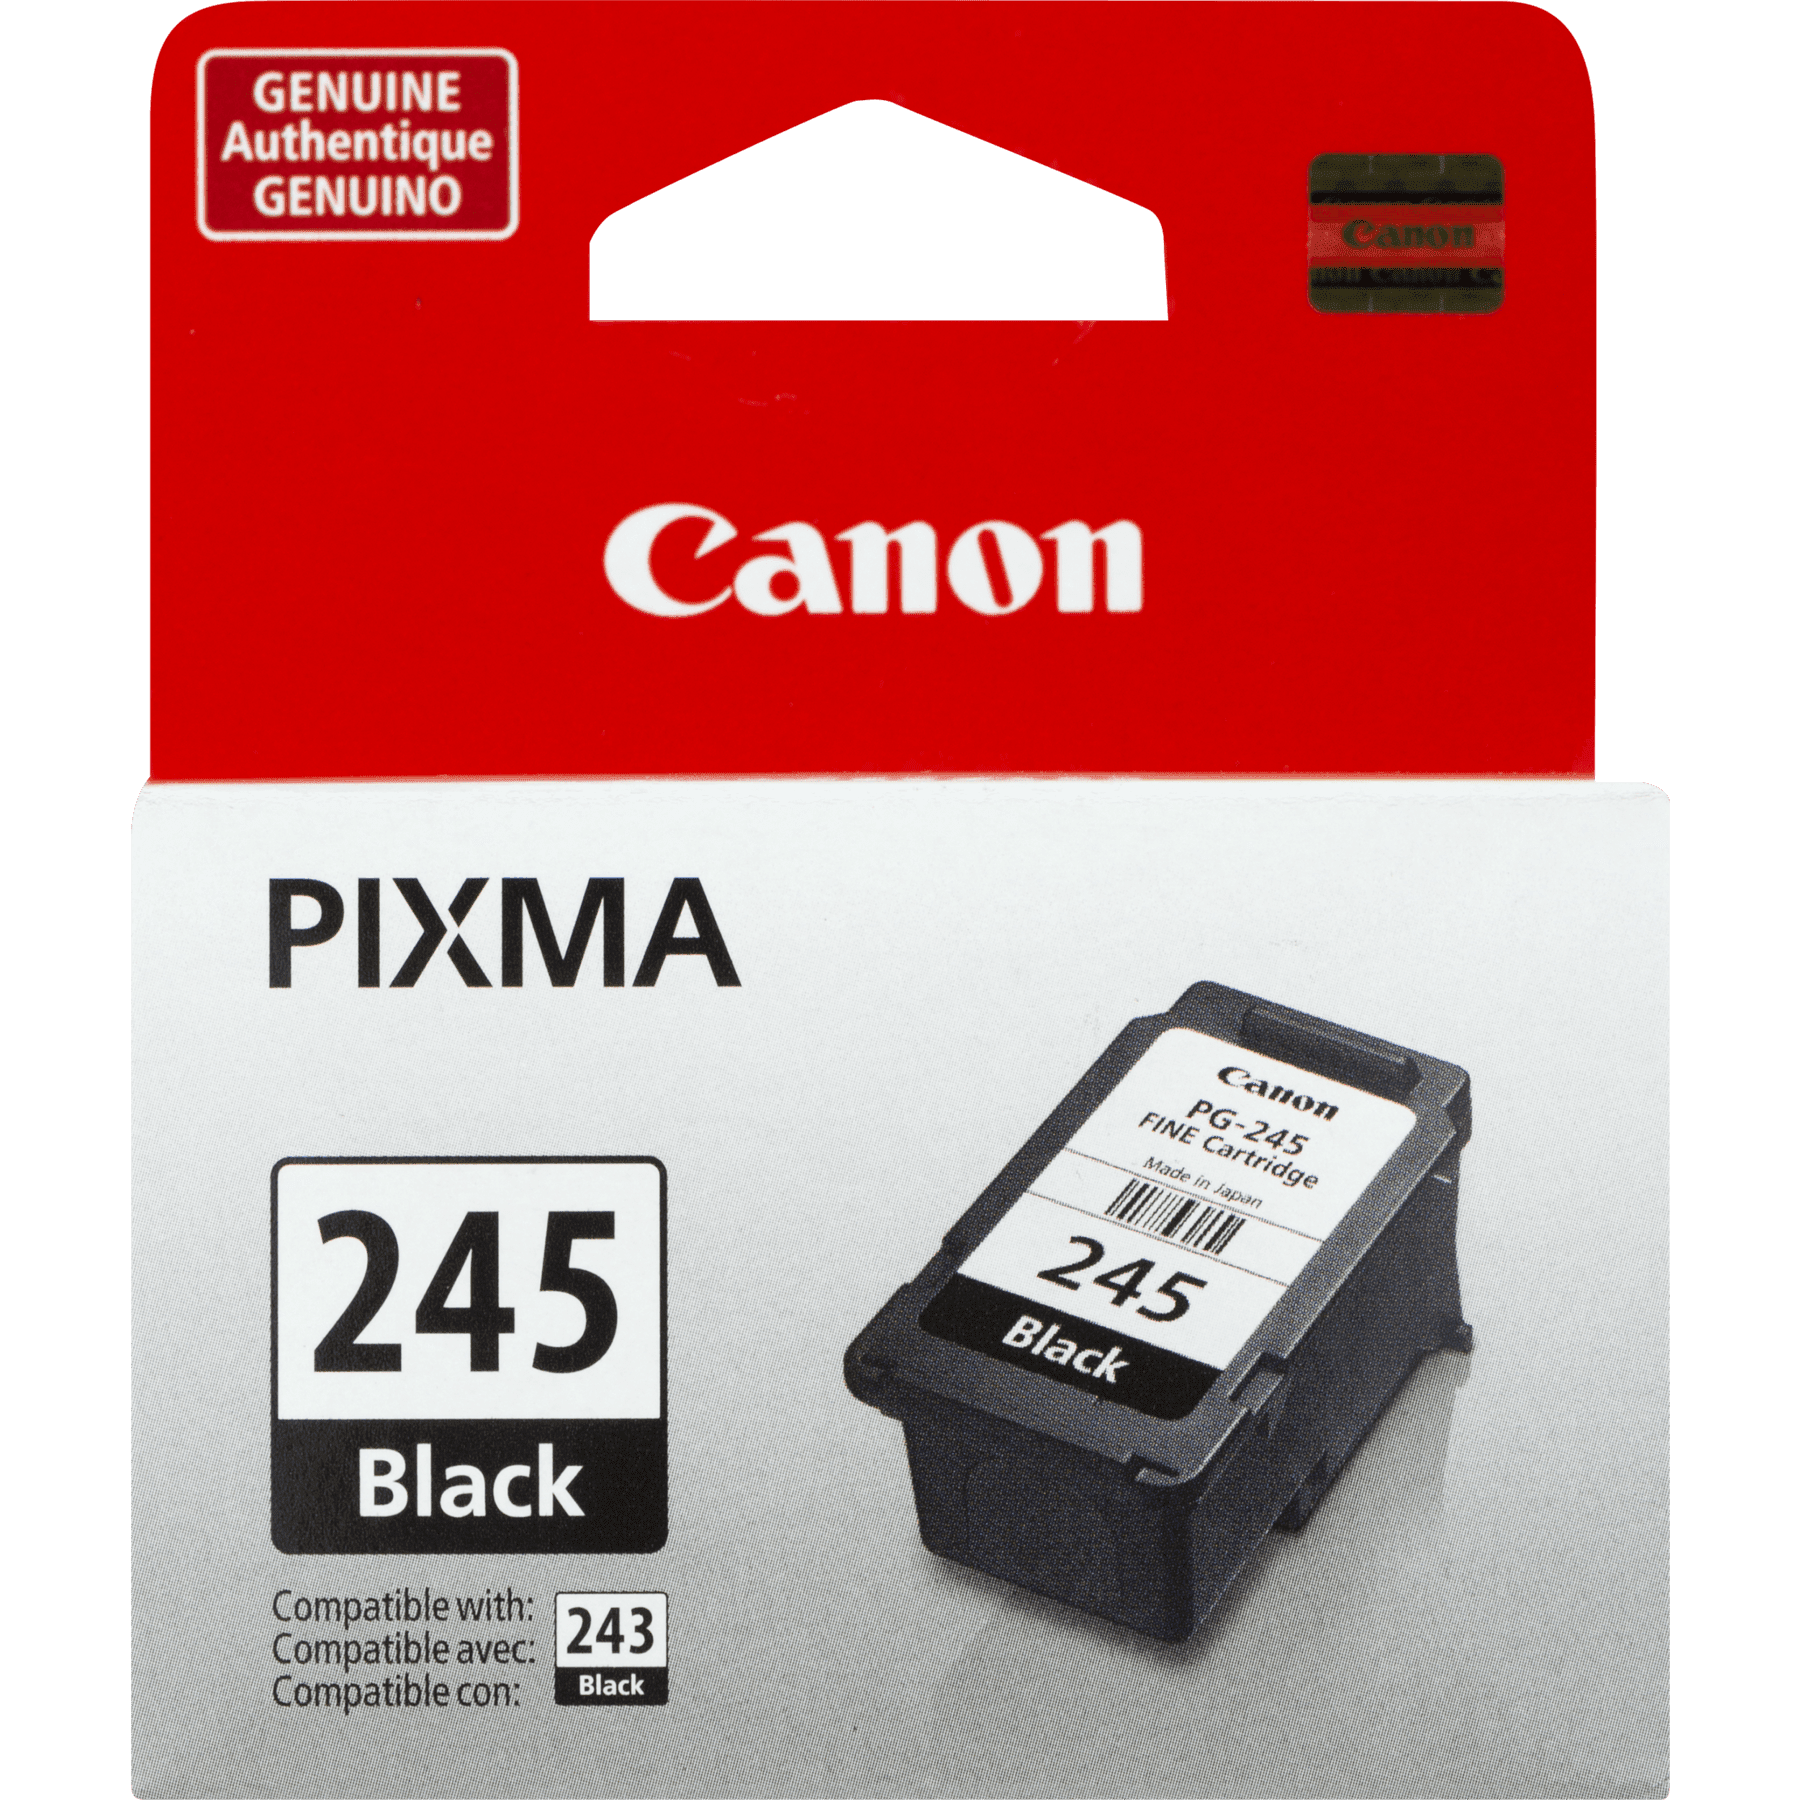 LemeroUtrust Remanufactured Ink Cartridge Replacement for Canon PG-245 245XL 245 use with Canon Pixma MX492 MX490 TS3122 TS202 MG2522 MG2525 MG2922 MG3022 1 Print Head, 3 Black Ink Cartridges 